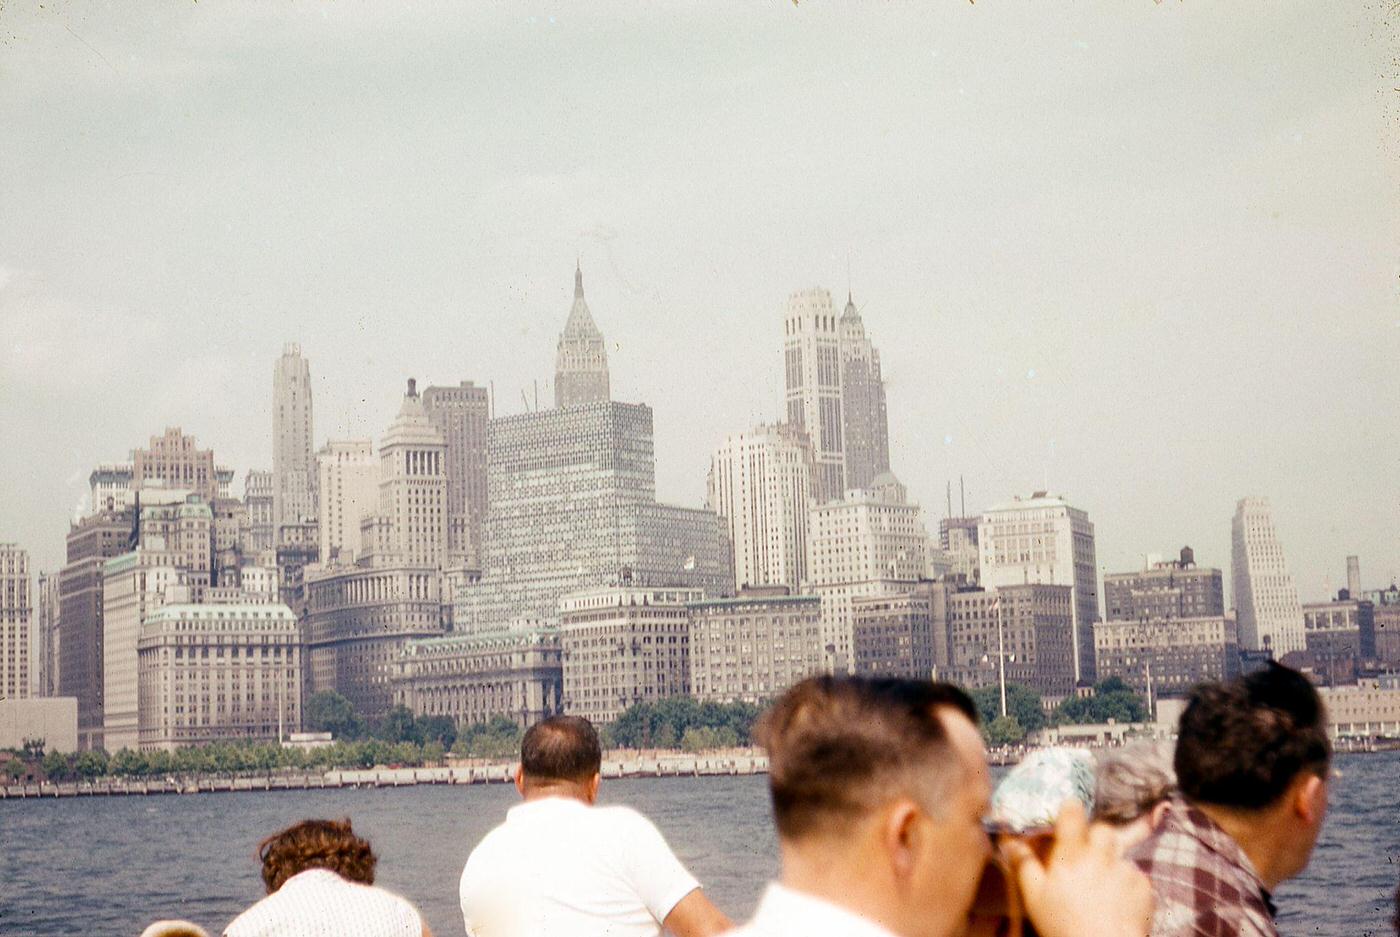 Tourists Aboard A Ship Taking Photos In New York Harbor Approaching Manhattan, 1952